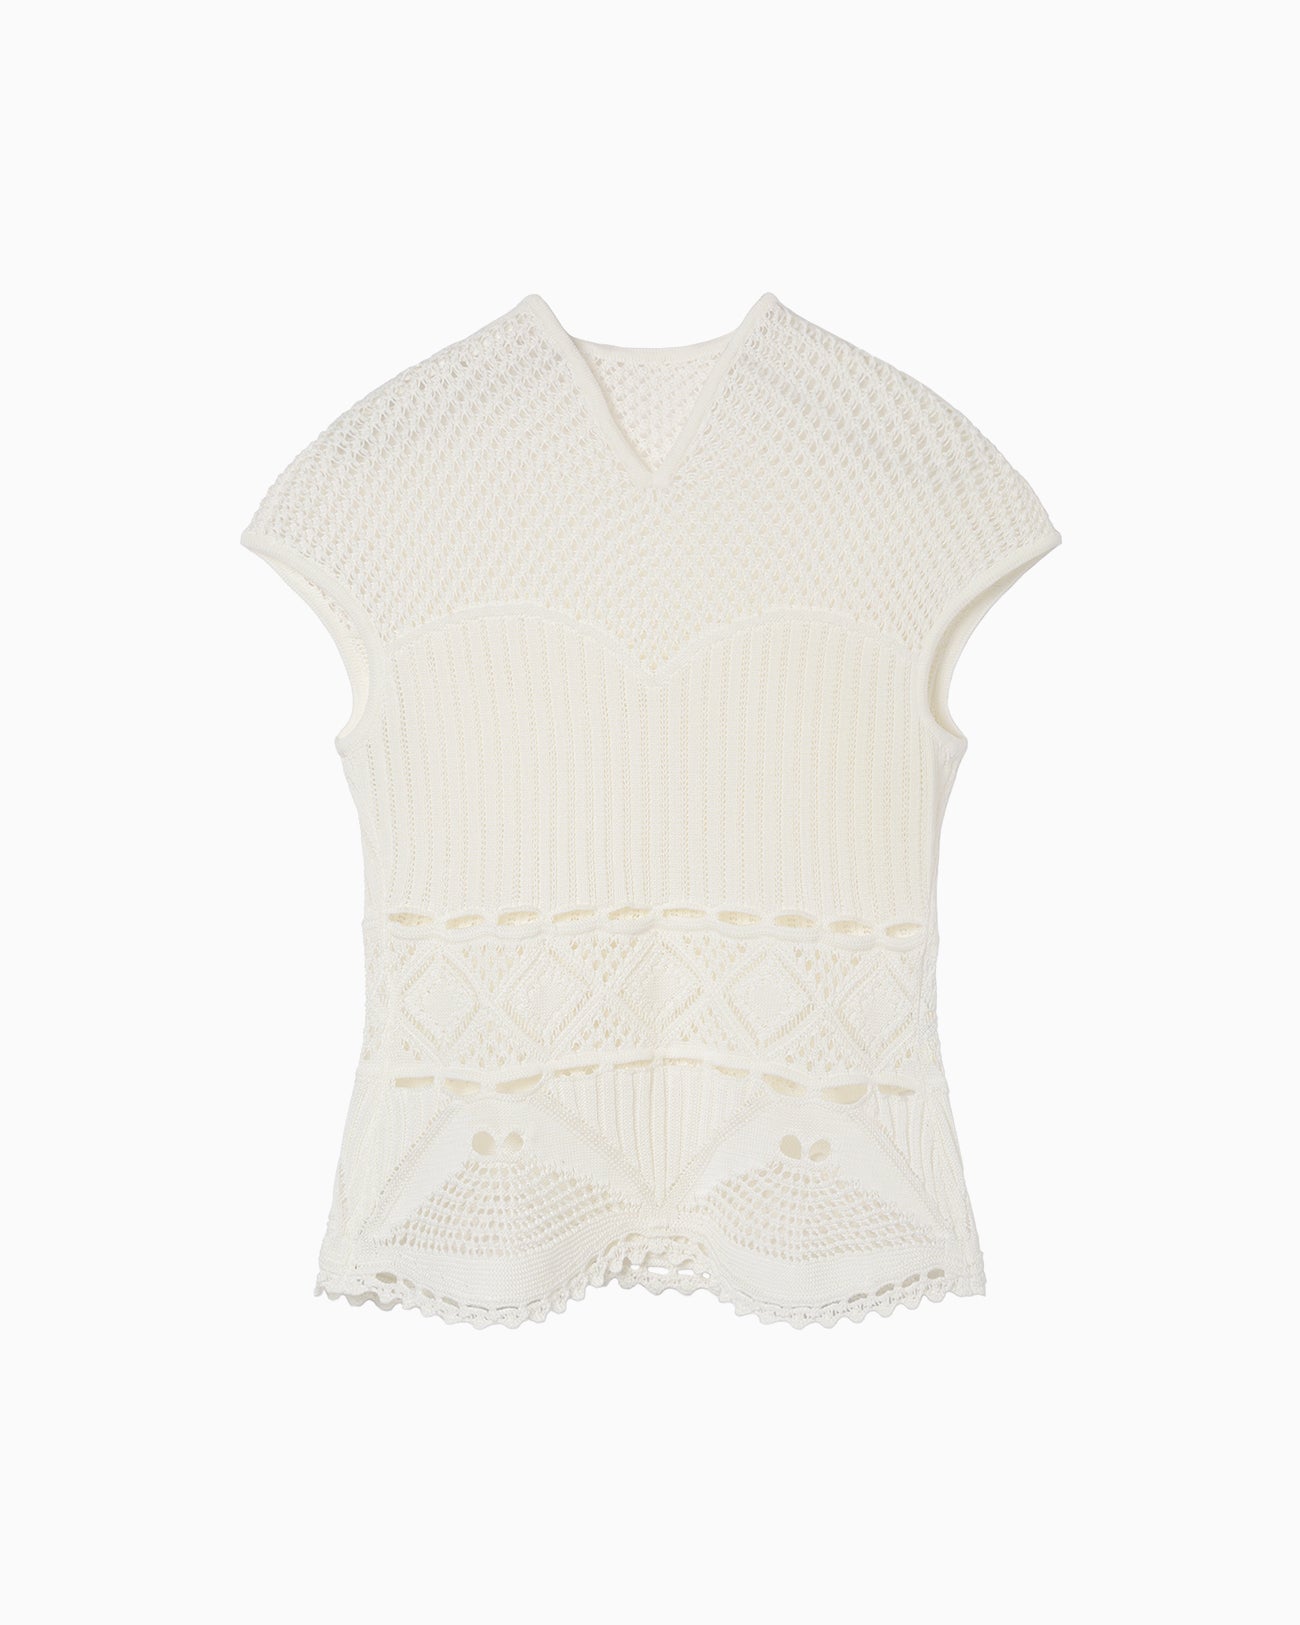 Cotton Lace Sleeveless Knitted Top サイズ3ホワイト